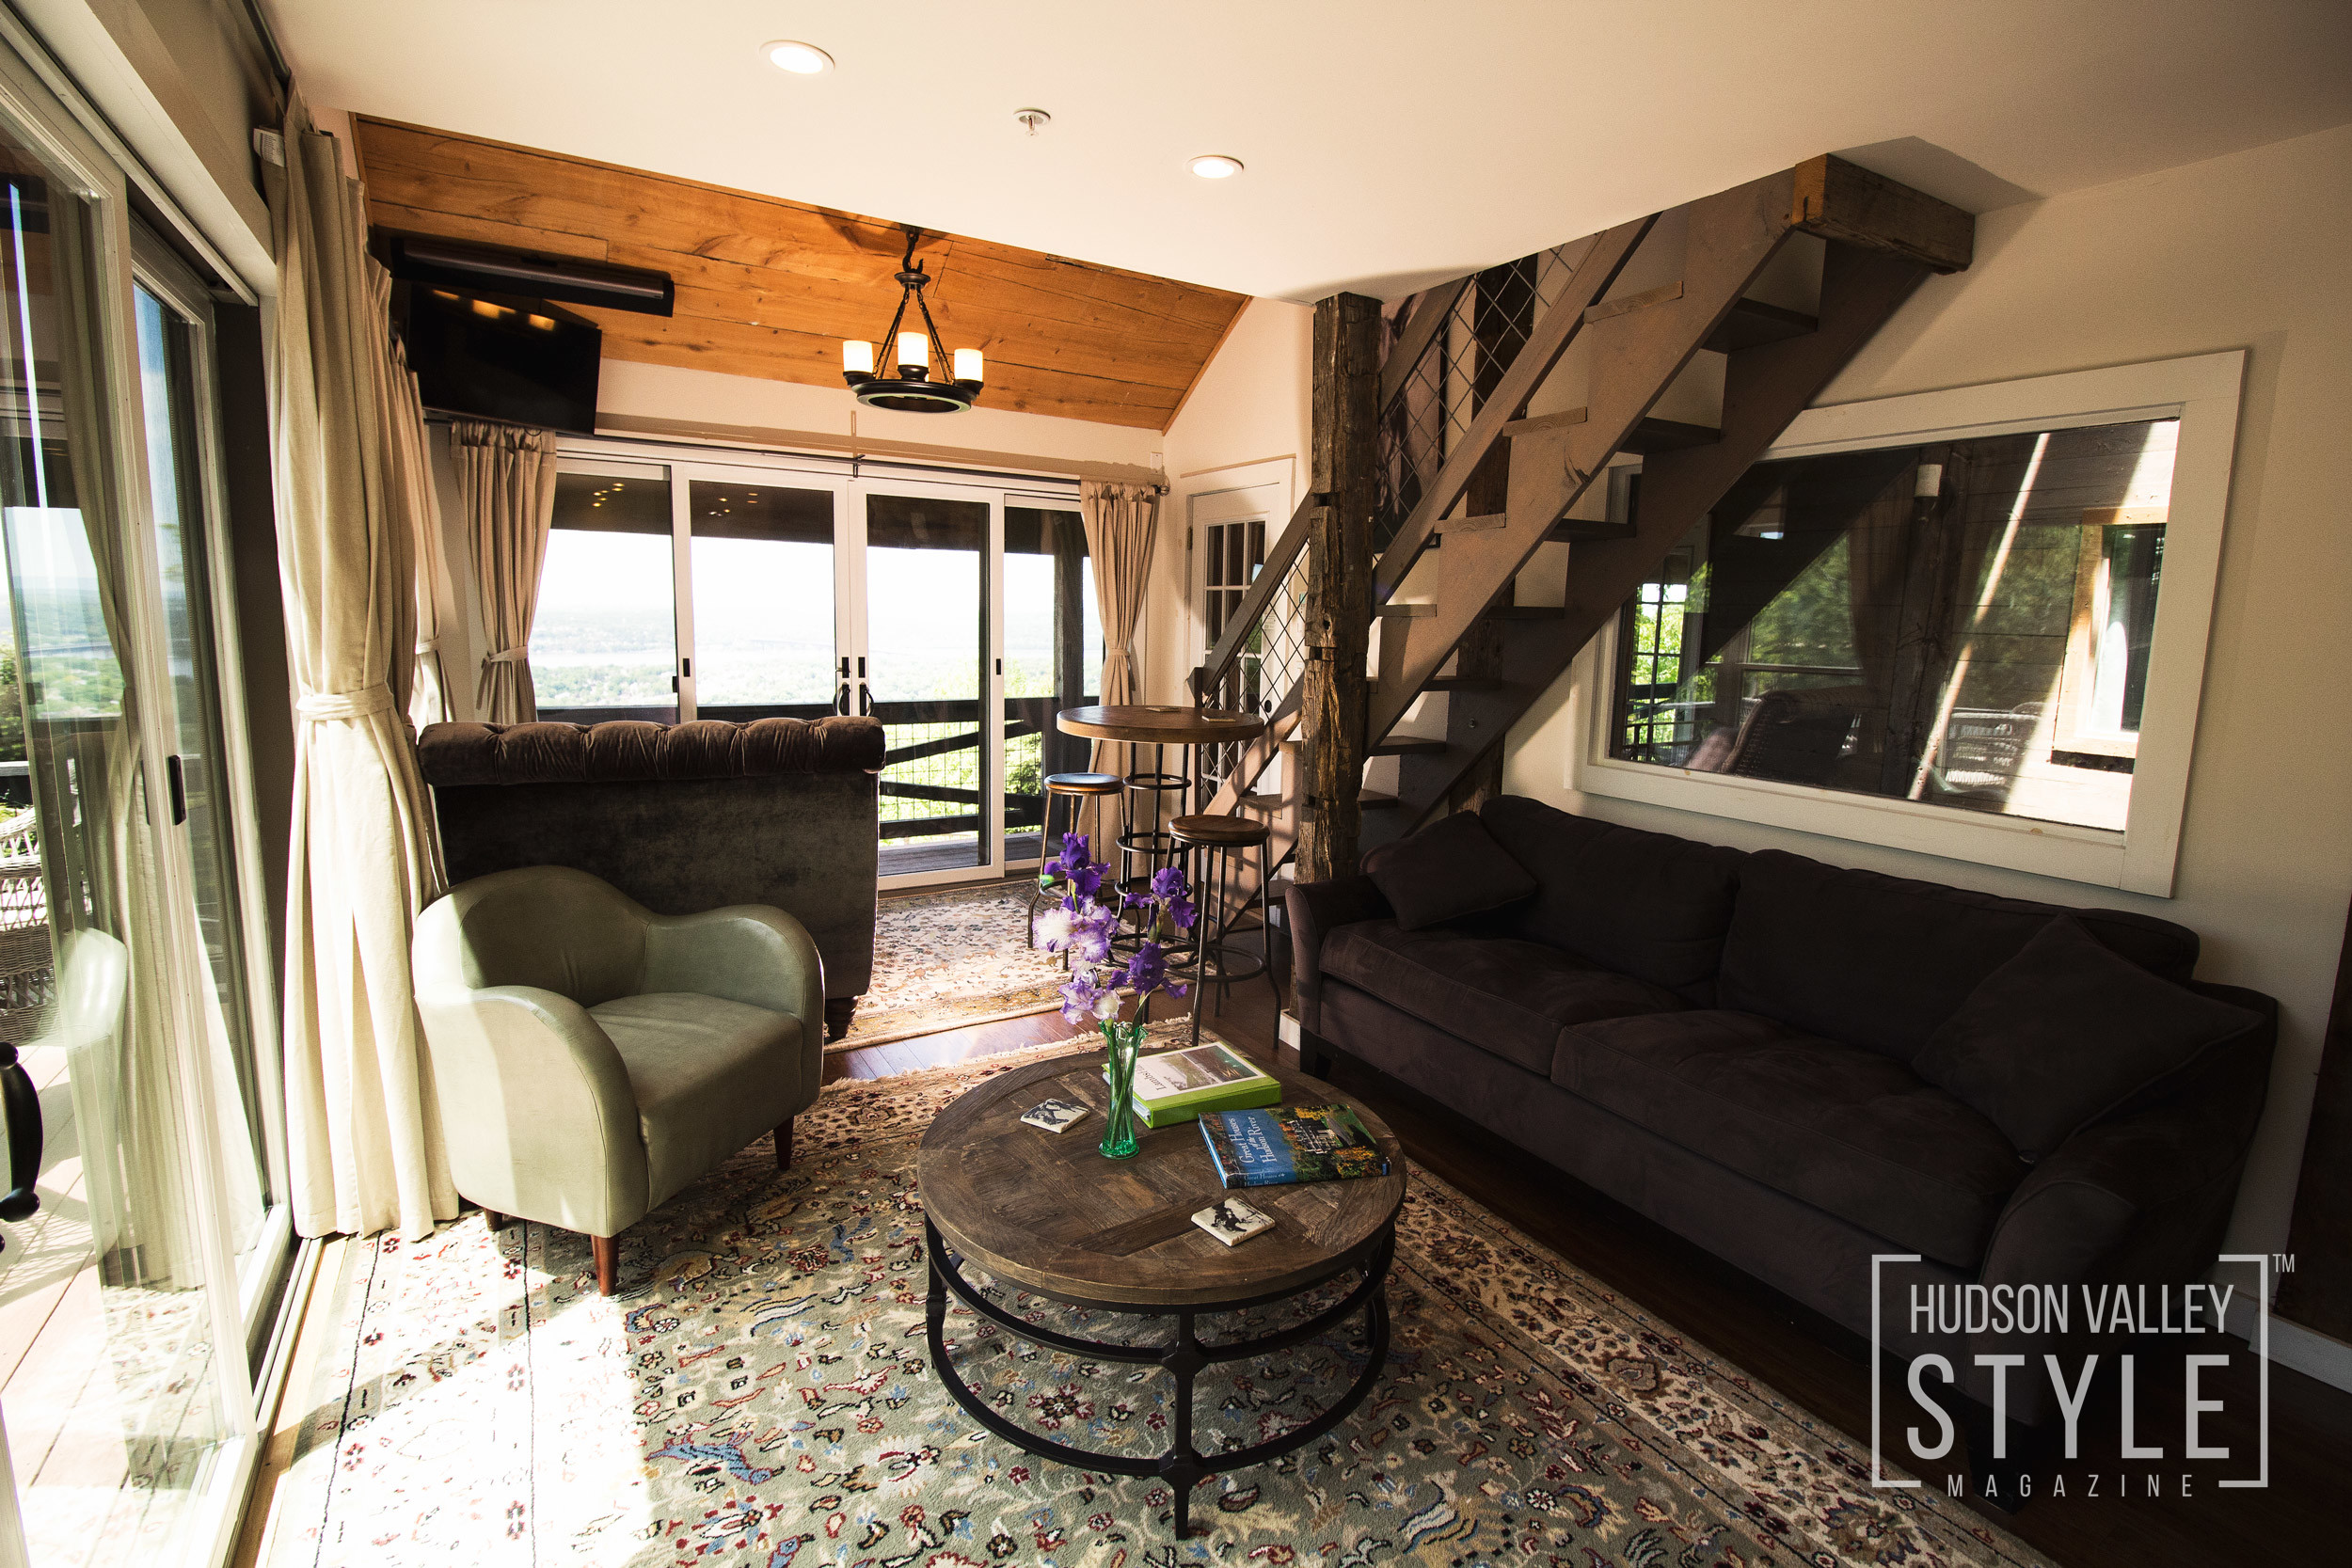 Hudson Valley Style Magazine - Lambs Hill Feature - Duncan Avenue Real Estate Photography Studio